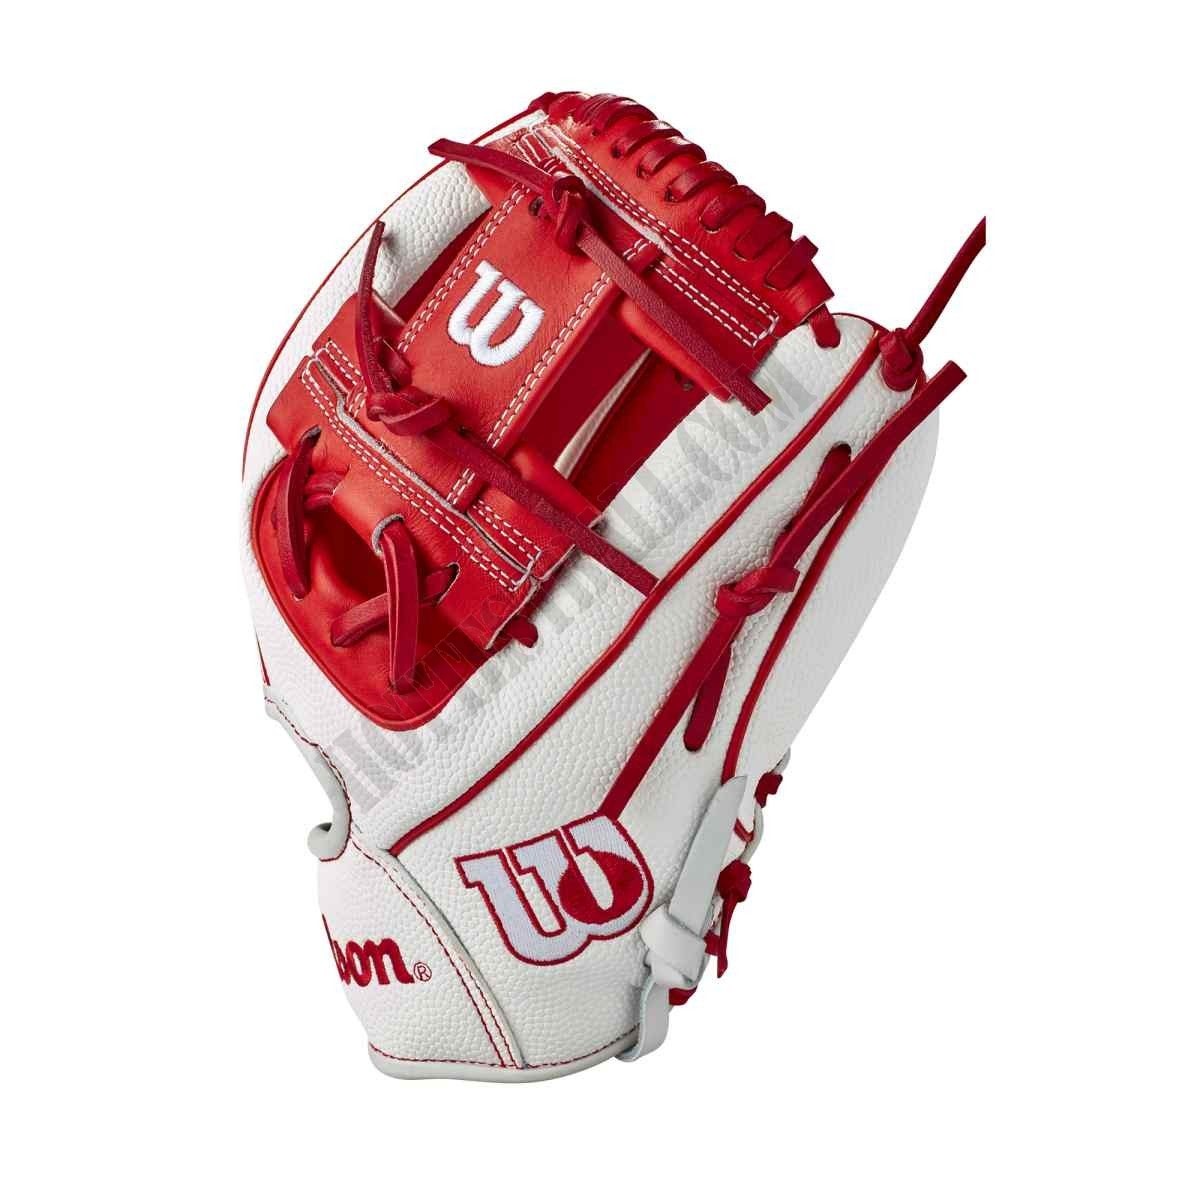 2021 A2000 1786SS Japan 11.5" Infield Baseball Glove - Limited Edition ● Wilson Promotions - -3